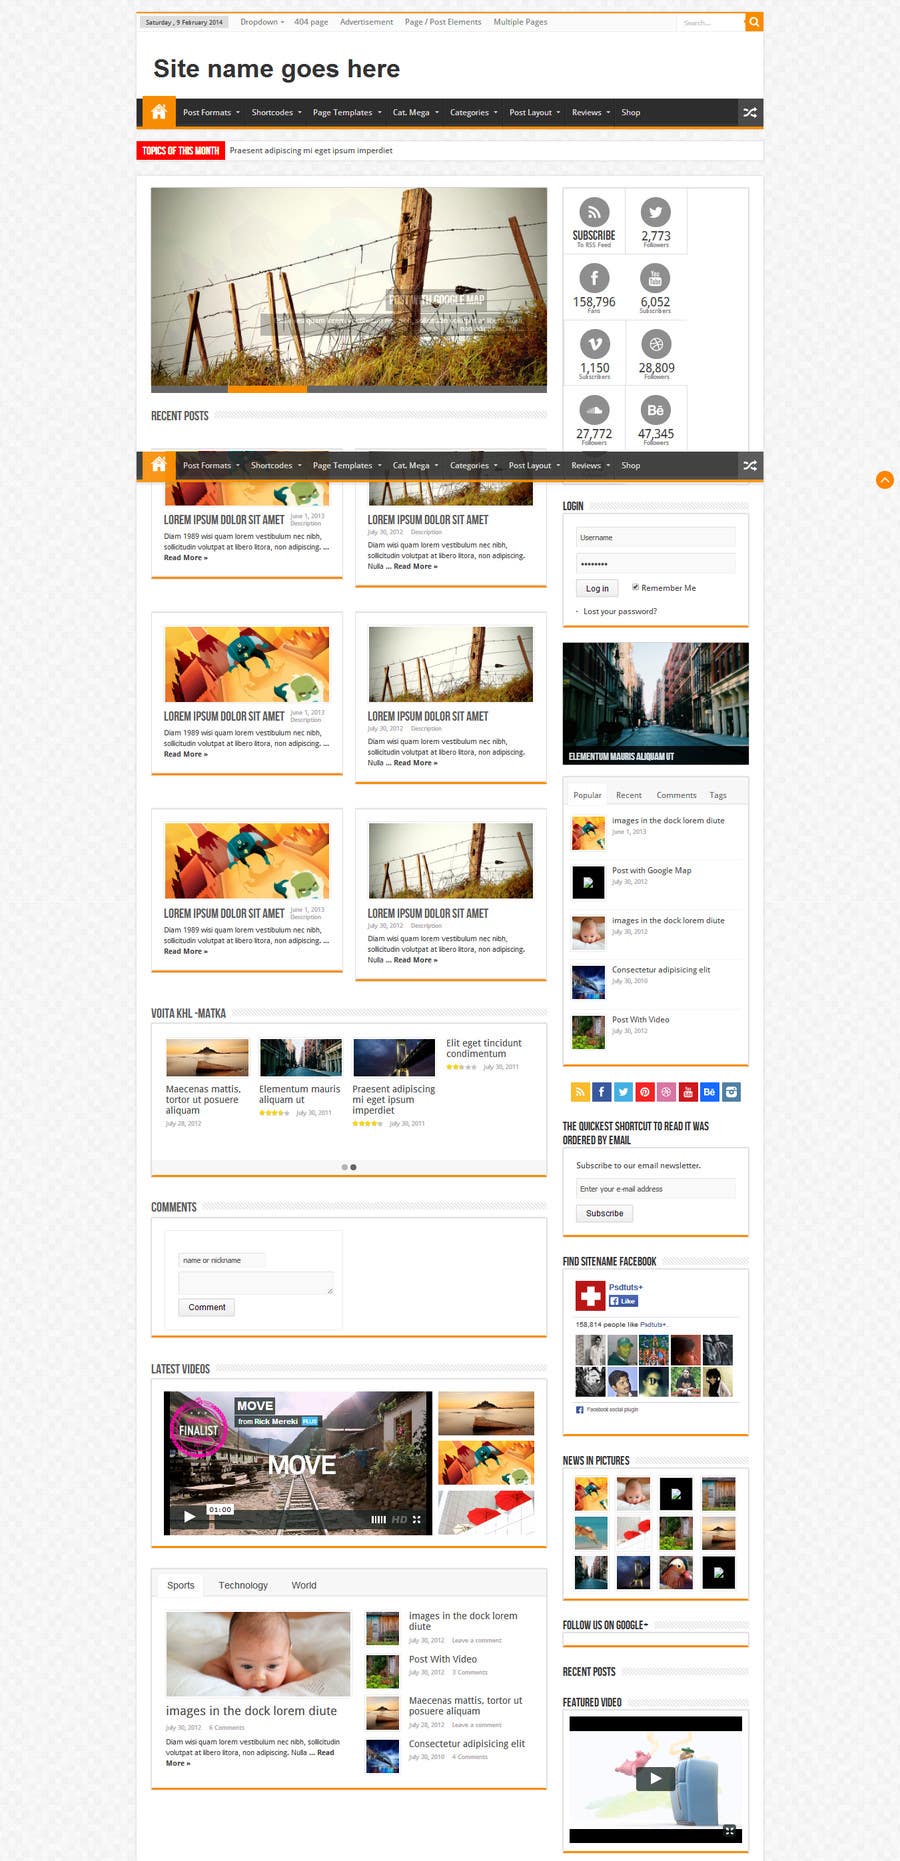 Penyertaan Peraduan #15 untuk                                                 Redesign the Content Area of a Web Page (Just one page)
                                            